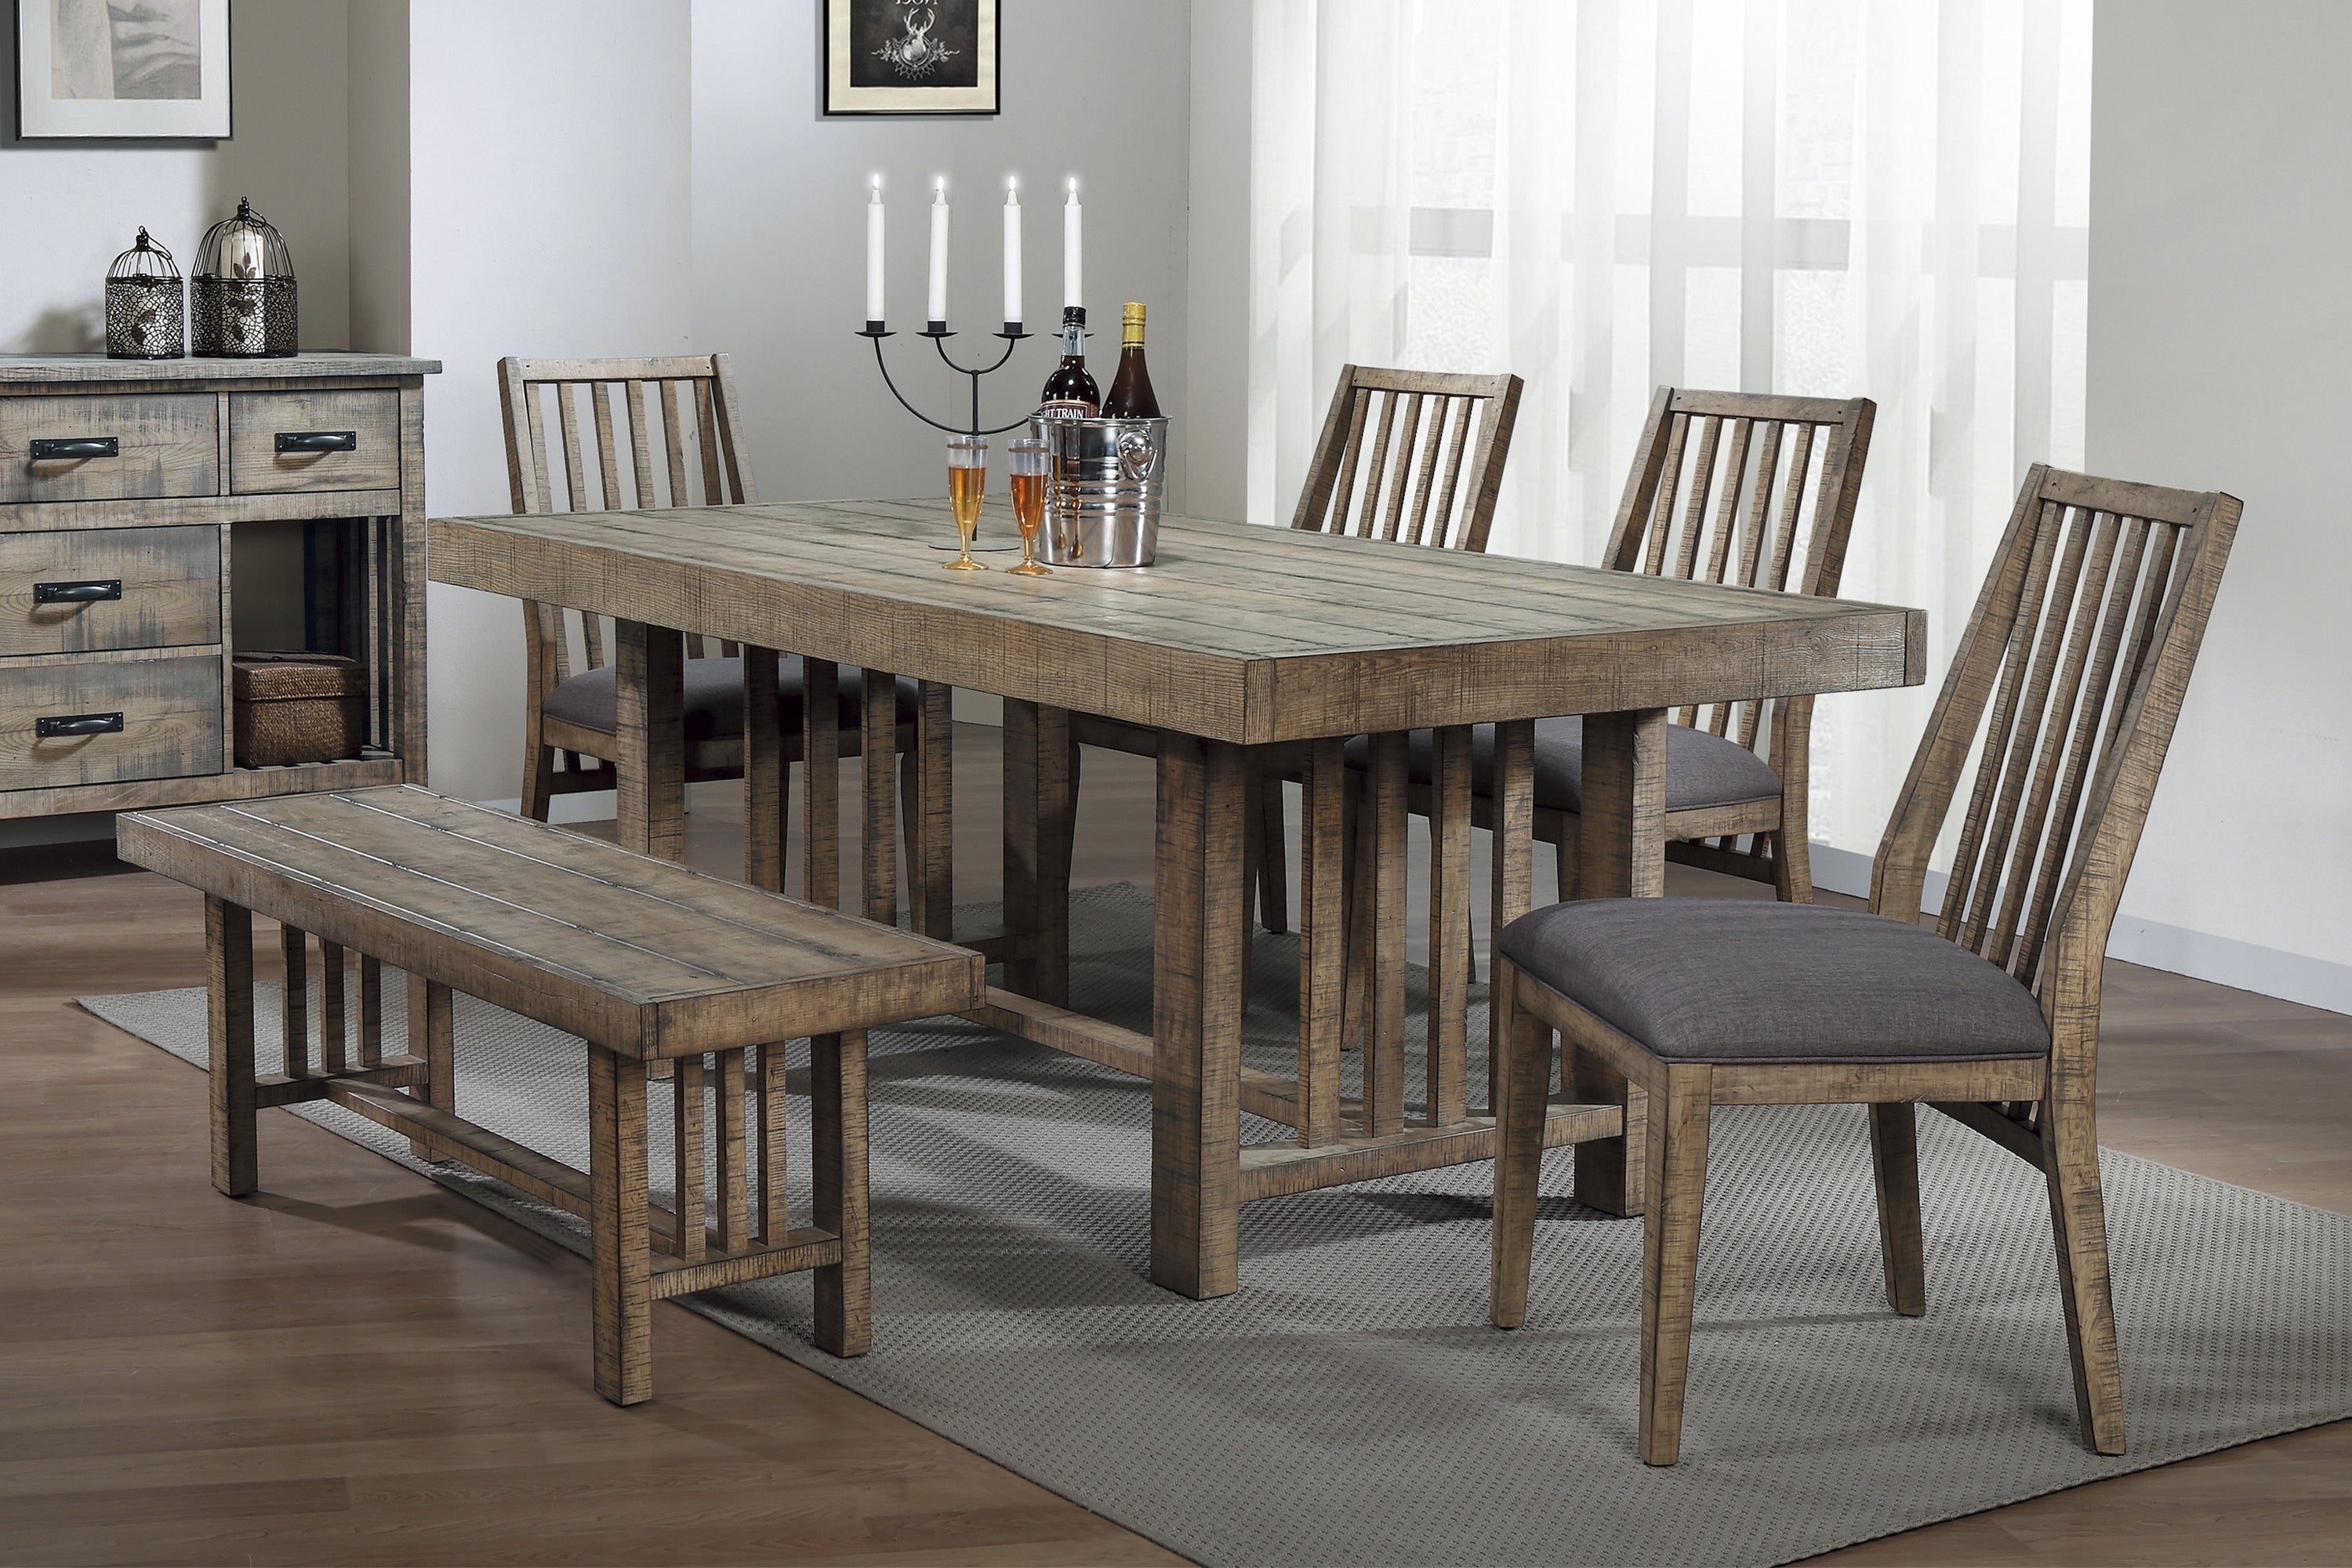 Classic Stye Dining Table 1pc Distressed Light Brown Finish Wood Rustic Design Dining Furniture (without chiars)